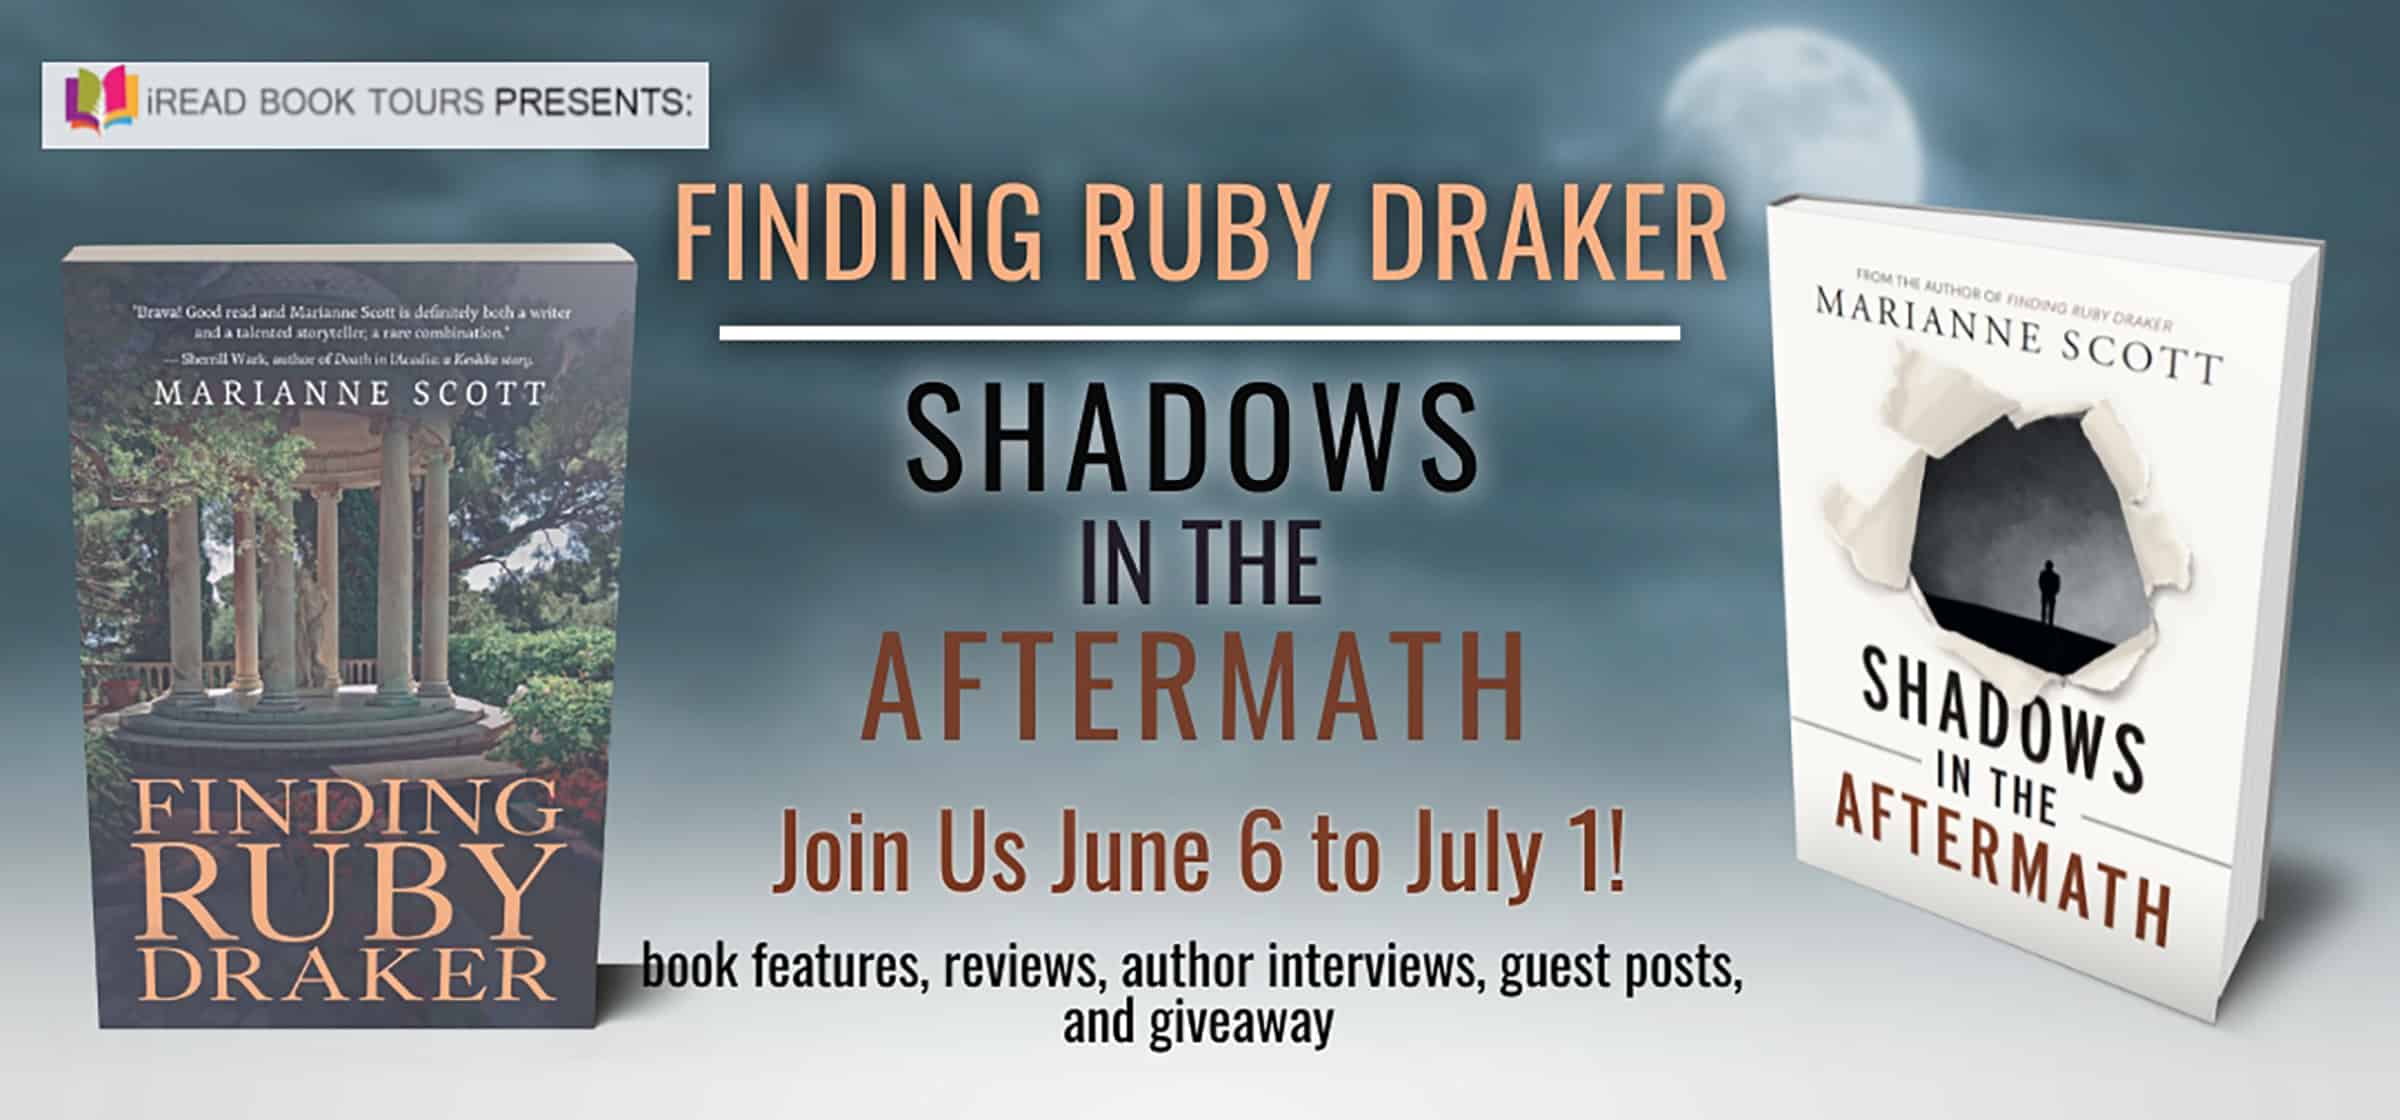 Shadows in the Aftermath (Ruby Draker #2) by Marianne Scott | Review, Author Interview, Giveaway